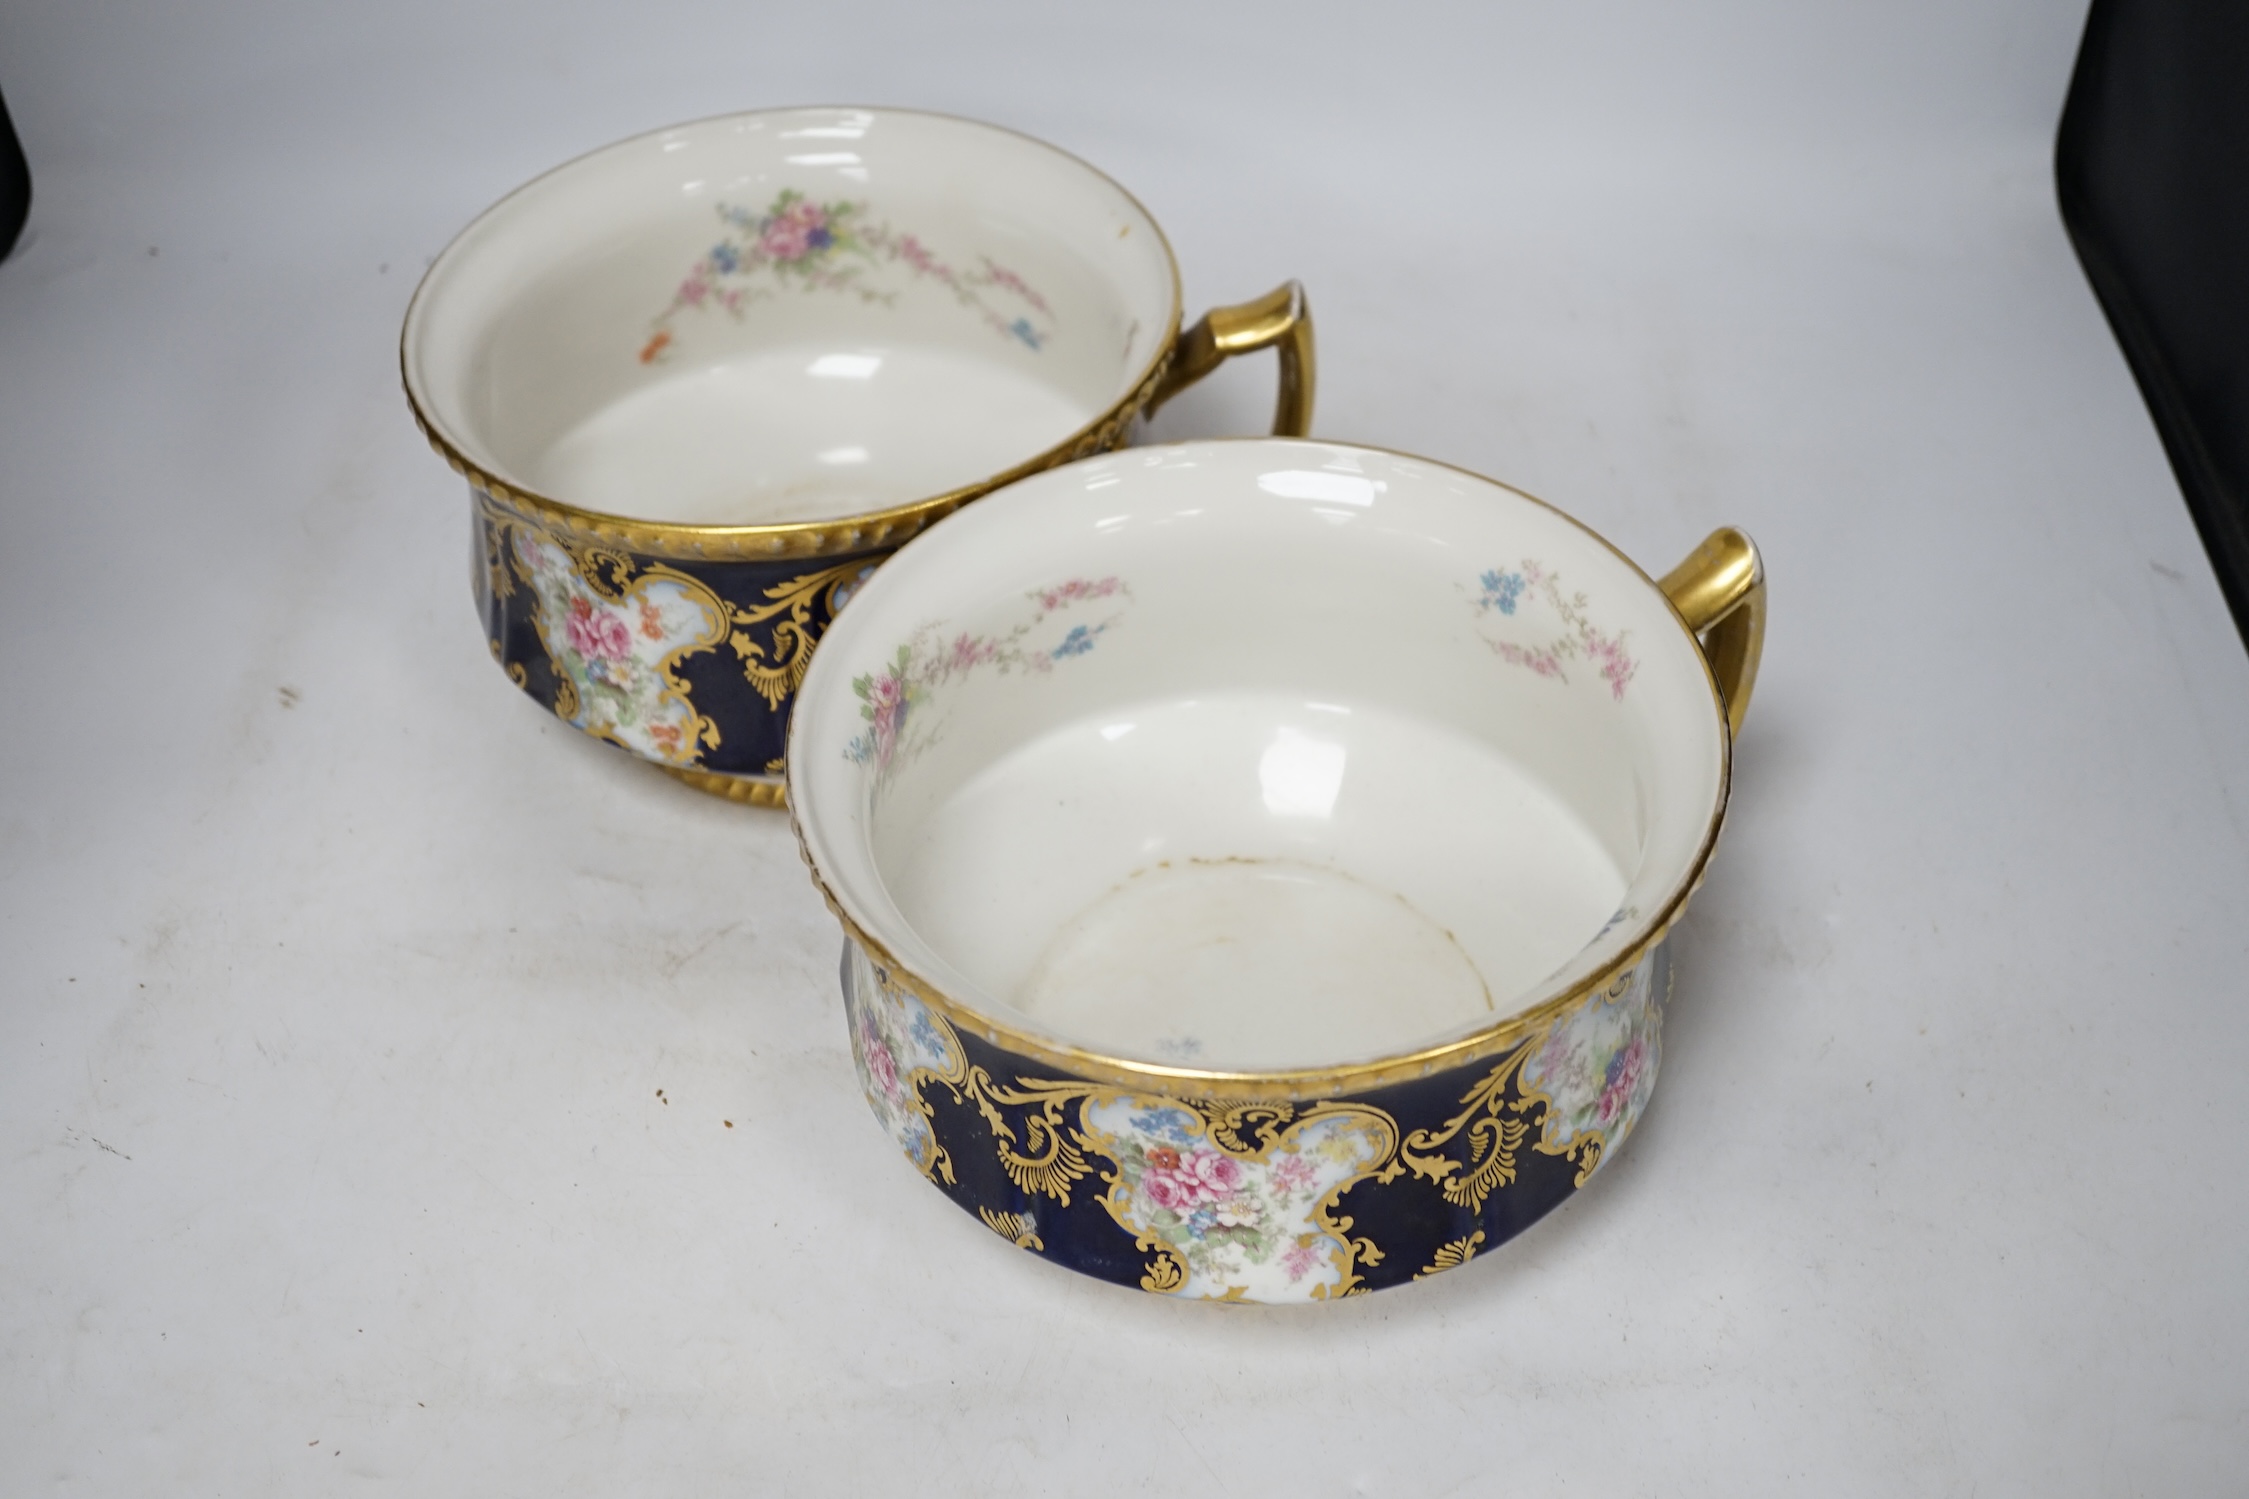 D. & C. Limoges, France, a pair of late 19th / early 20th century chamber pots, 21cm diameter. Condition - fair, some wear